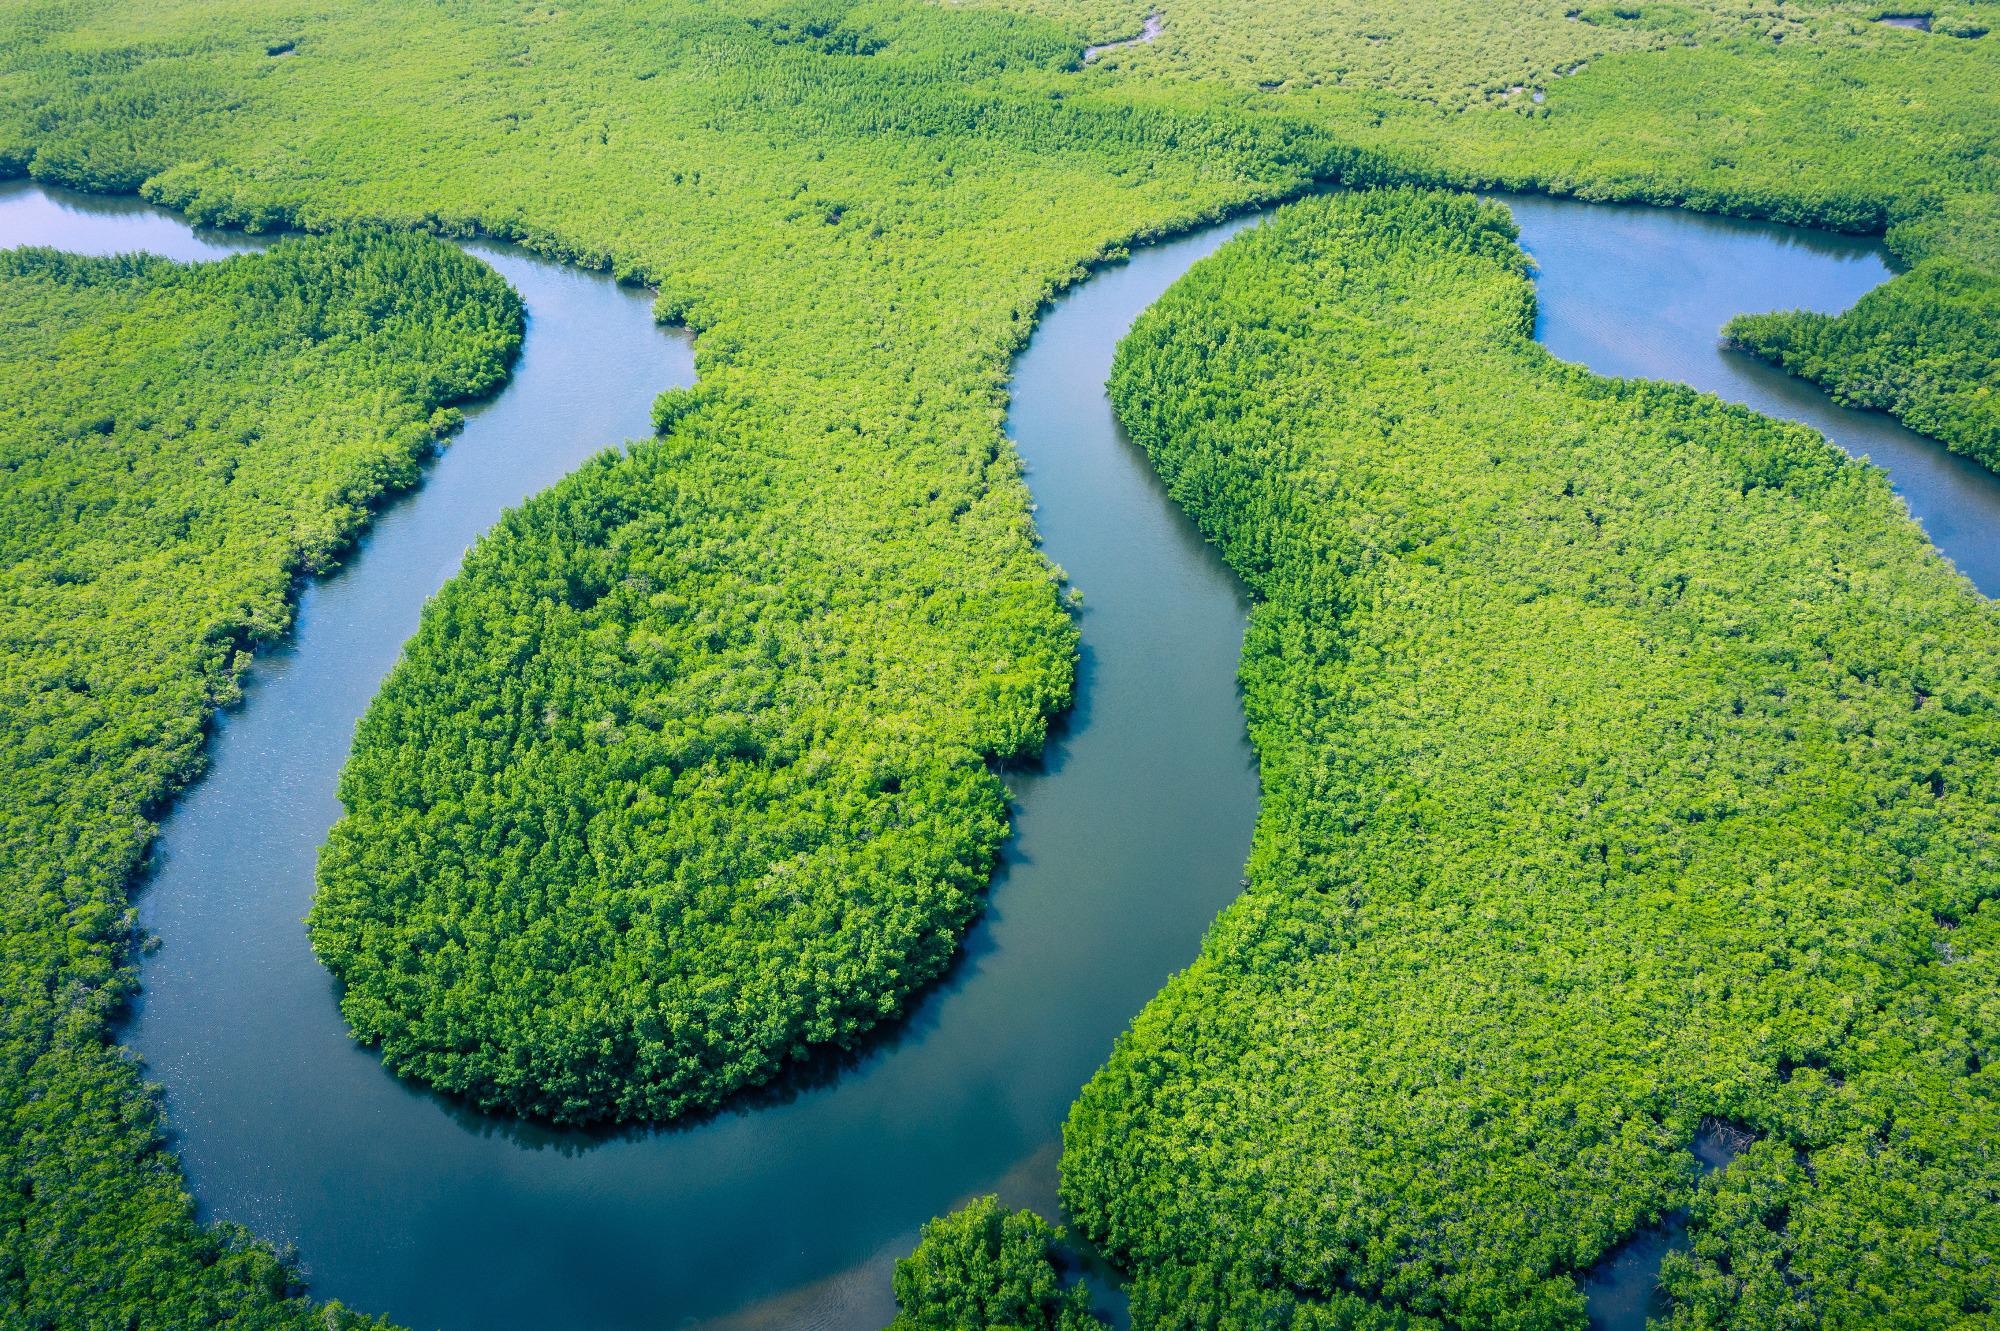 Trees in the Amazon Wetland Areas are a Significant Source of Methane